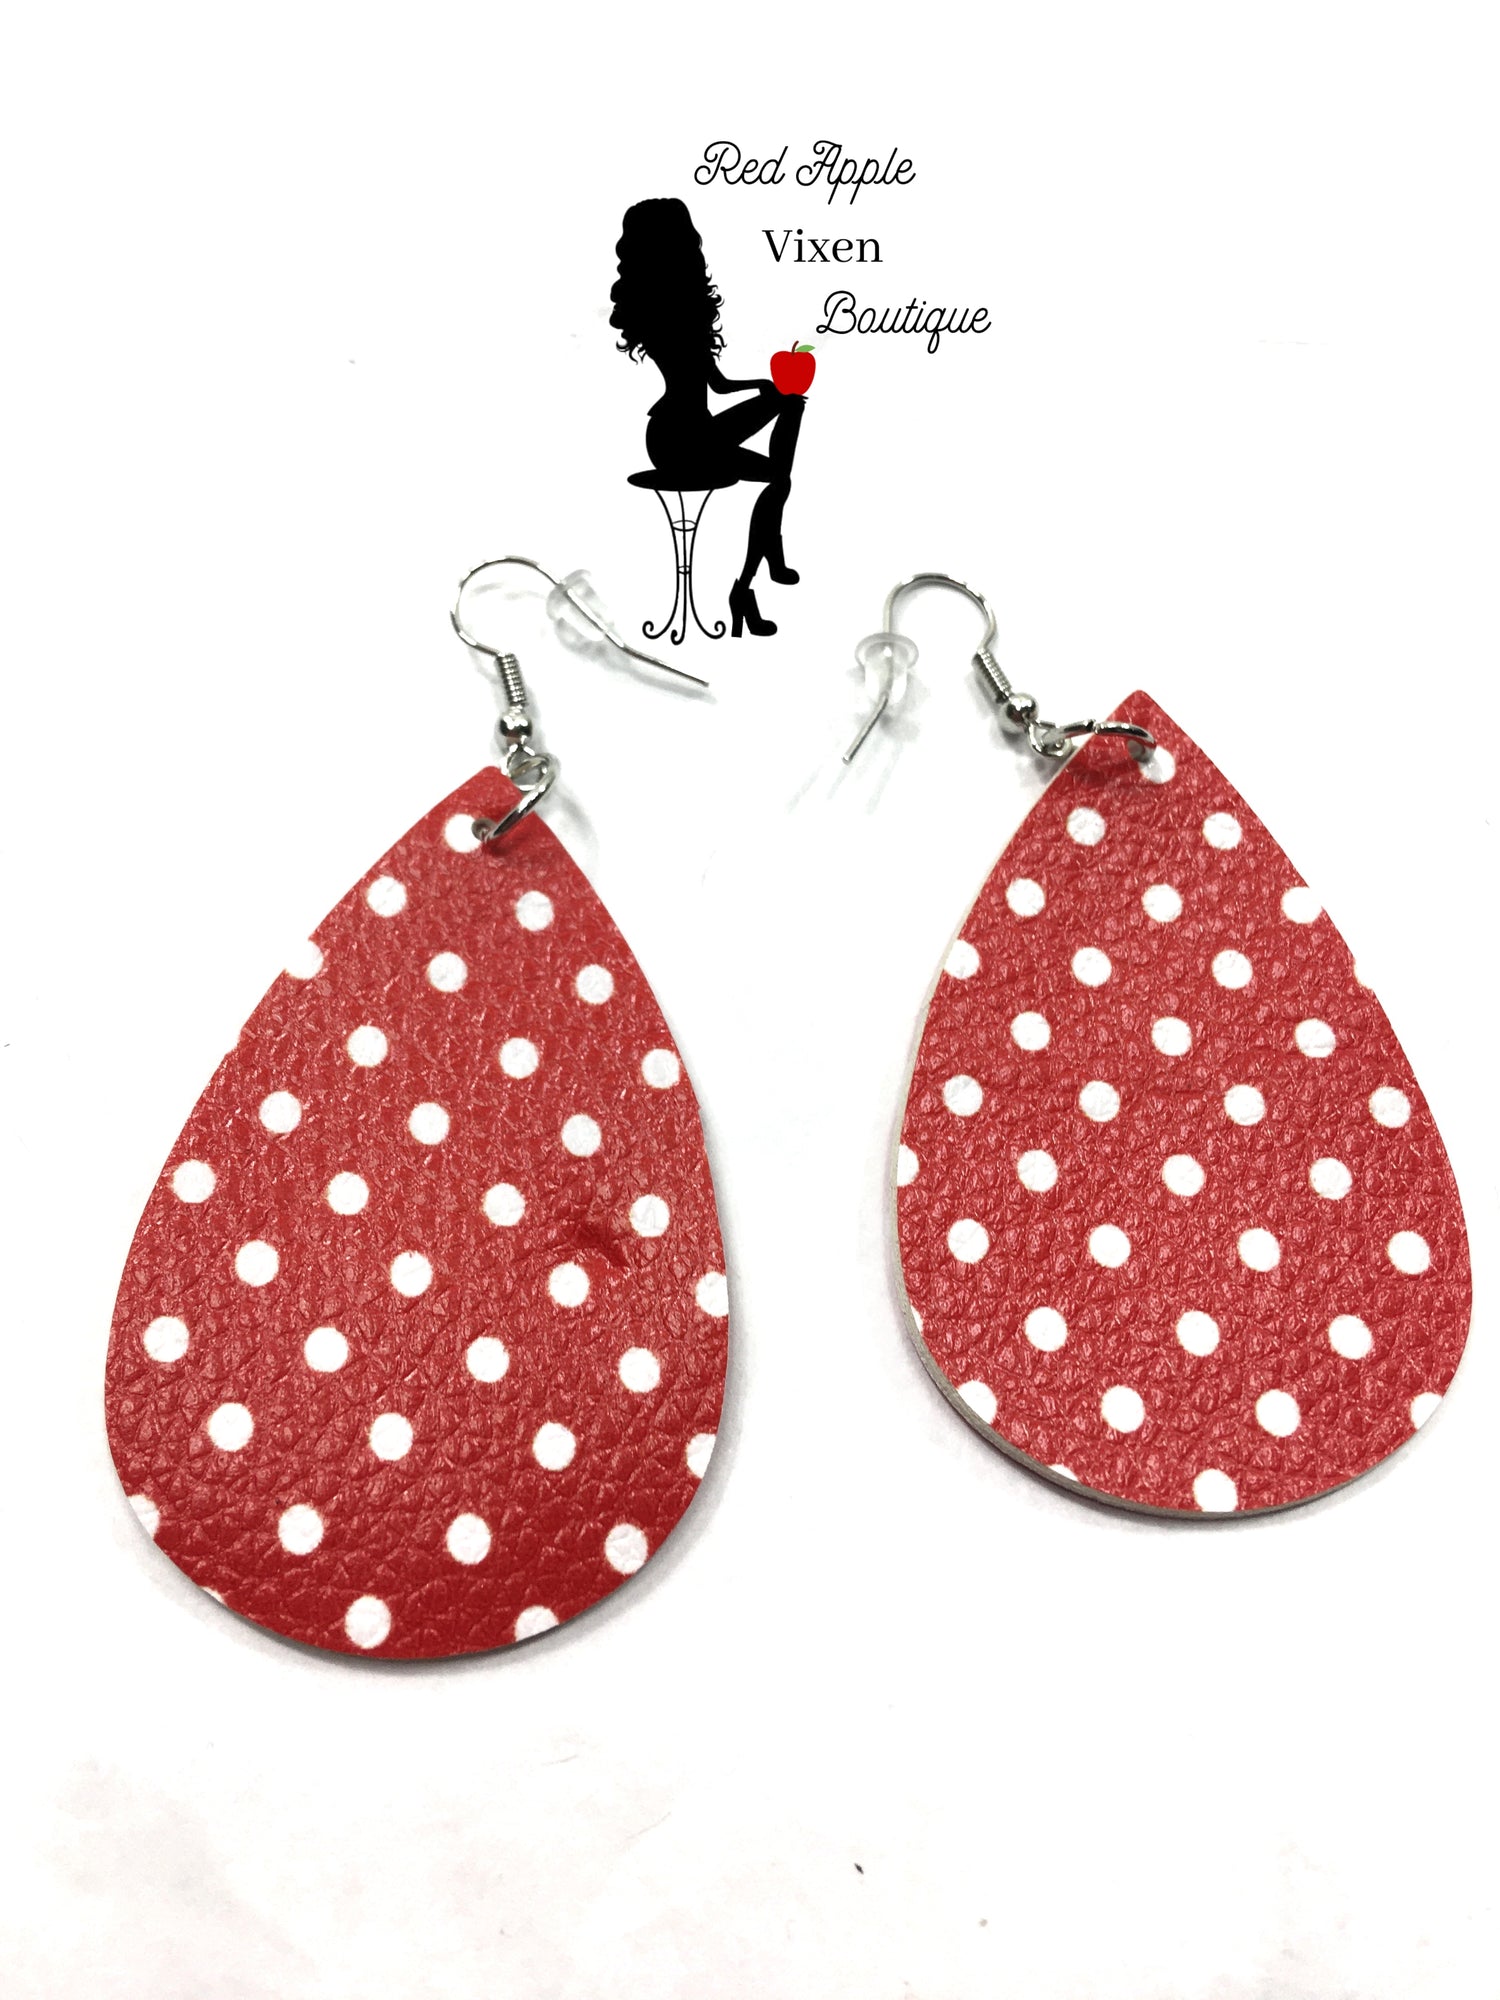 Red and White Polka Dot Print Earrings - Red Apple Vixen Boutique